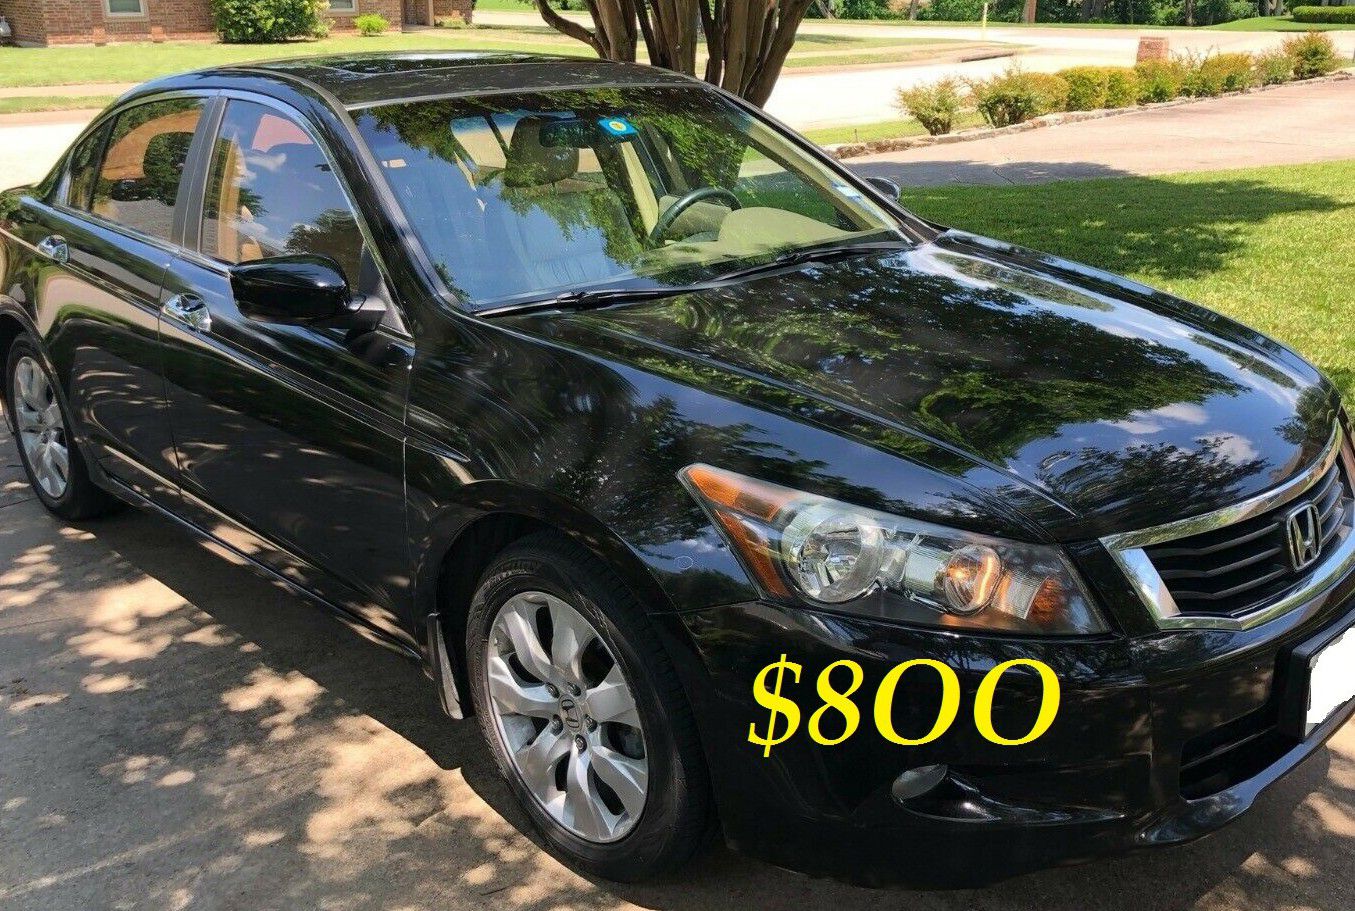 💝✅$8OO URGENT I sell my family car 2OO9 Honda Accord EX-L Everything is working great!💕💝 Runs great and fun to drive!!🟢🎁